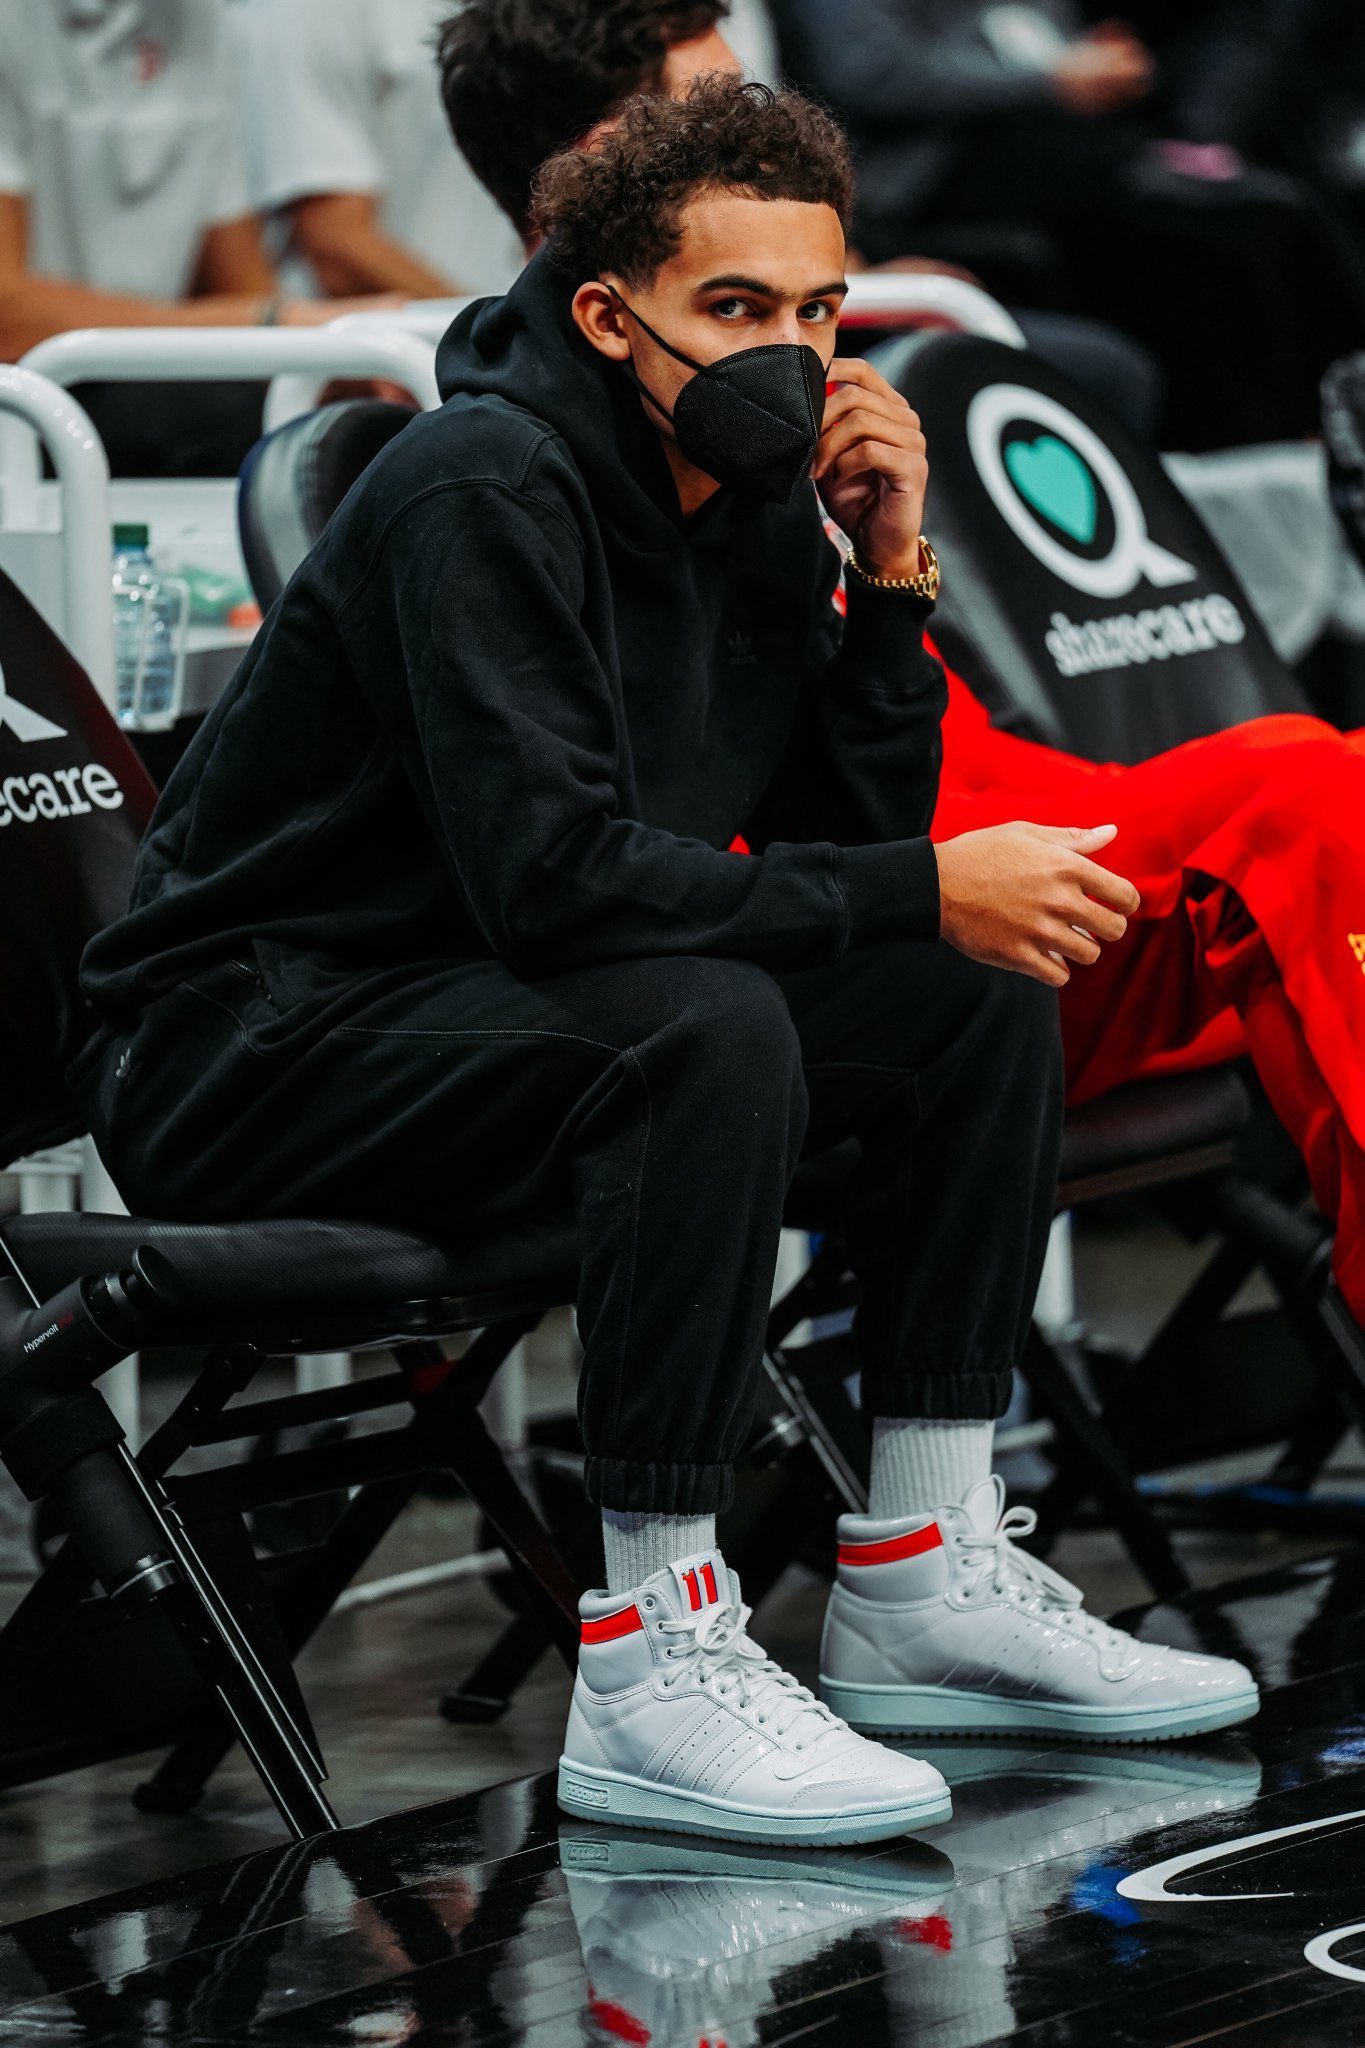 Adidas trae young. Adidas trae young 1. Adidas trae young 1 Ice. Trae young 3 кроссовки. Баскетбольные кроссовки adidas trae young.